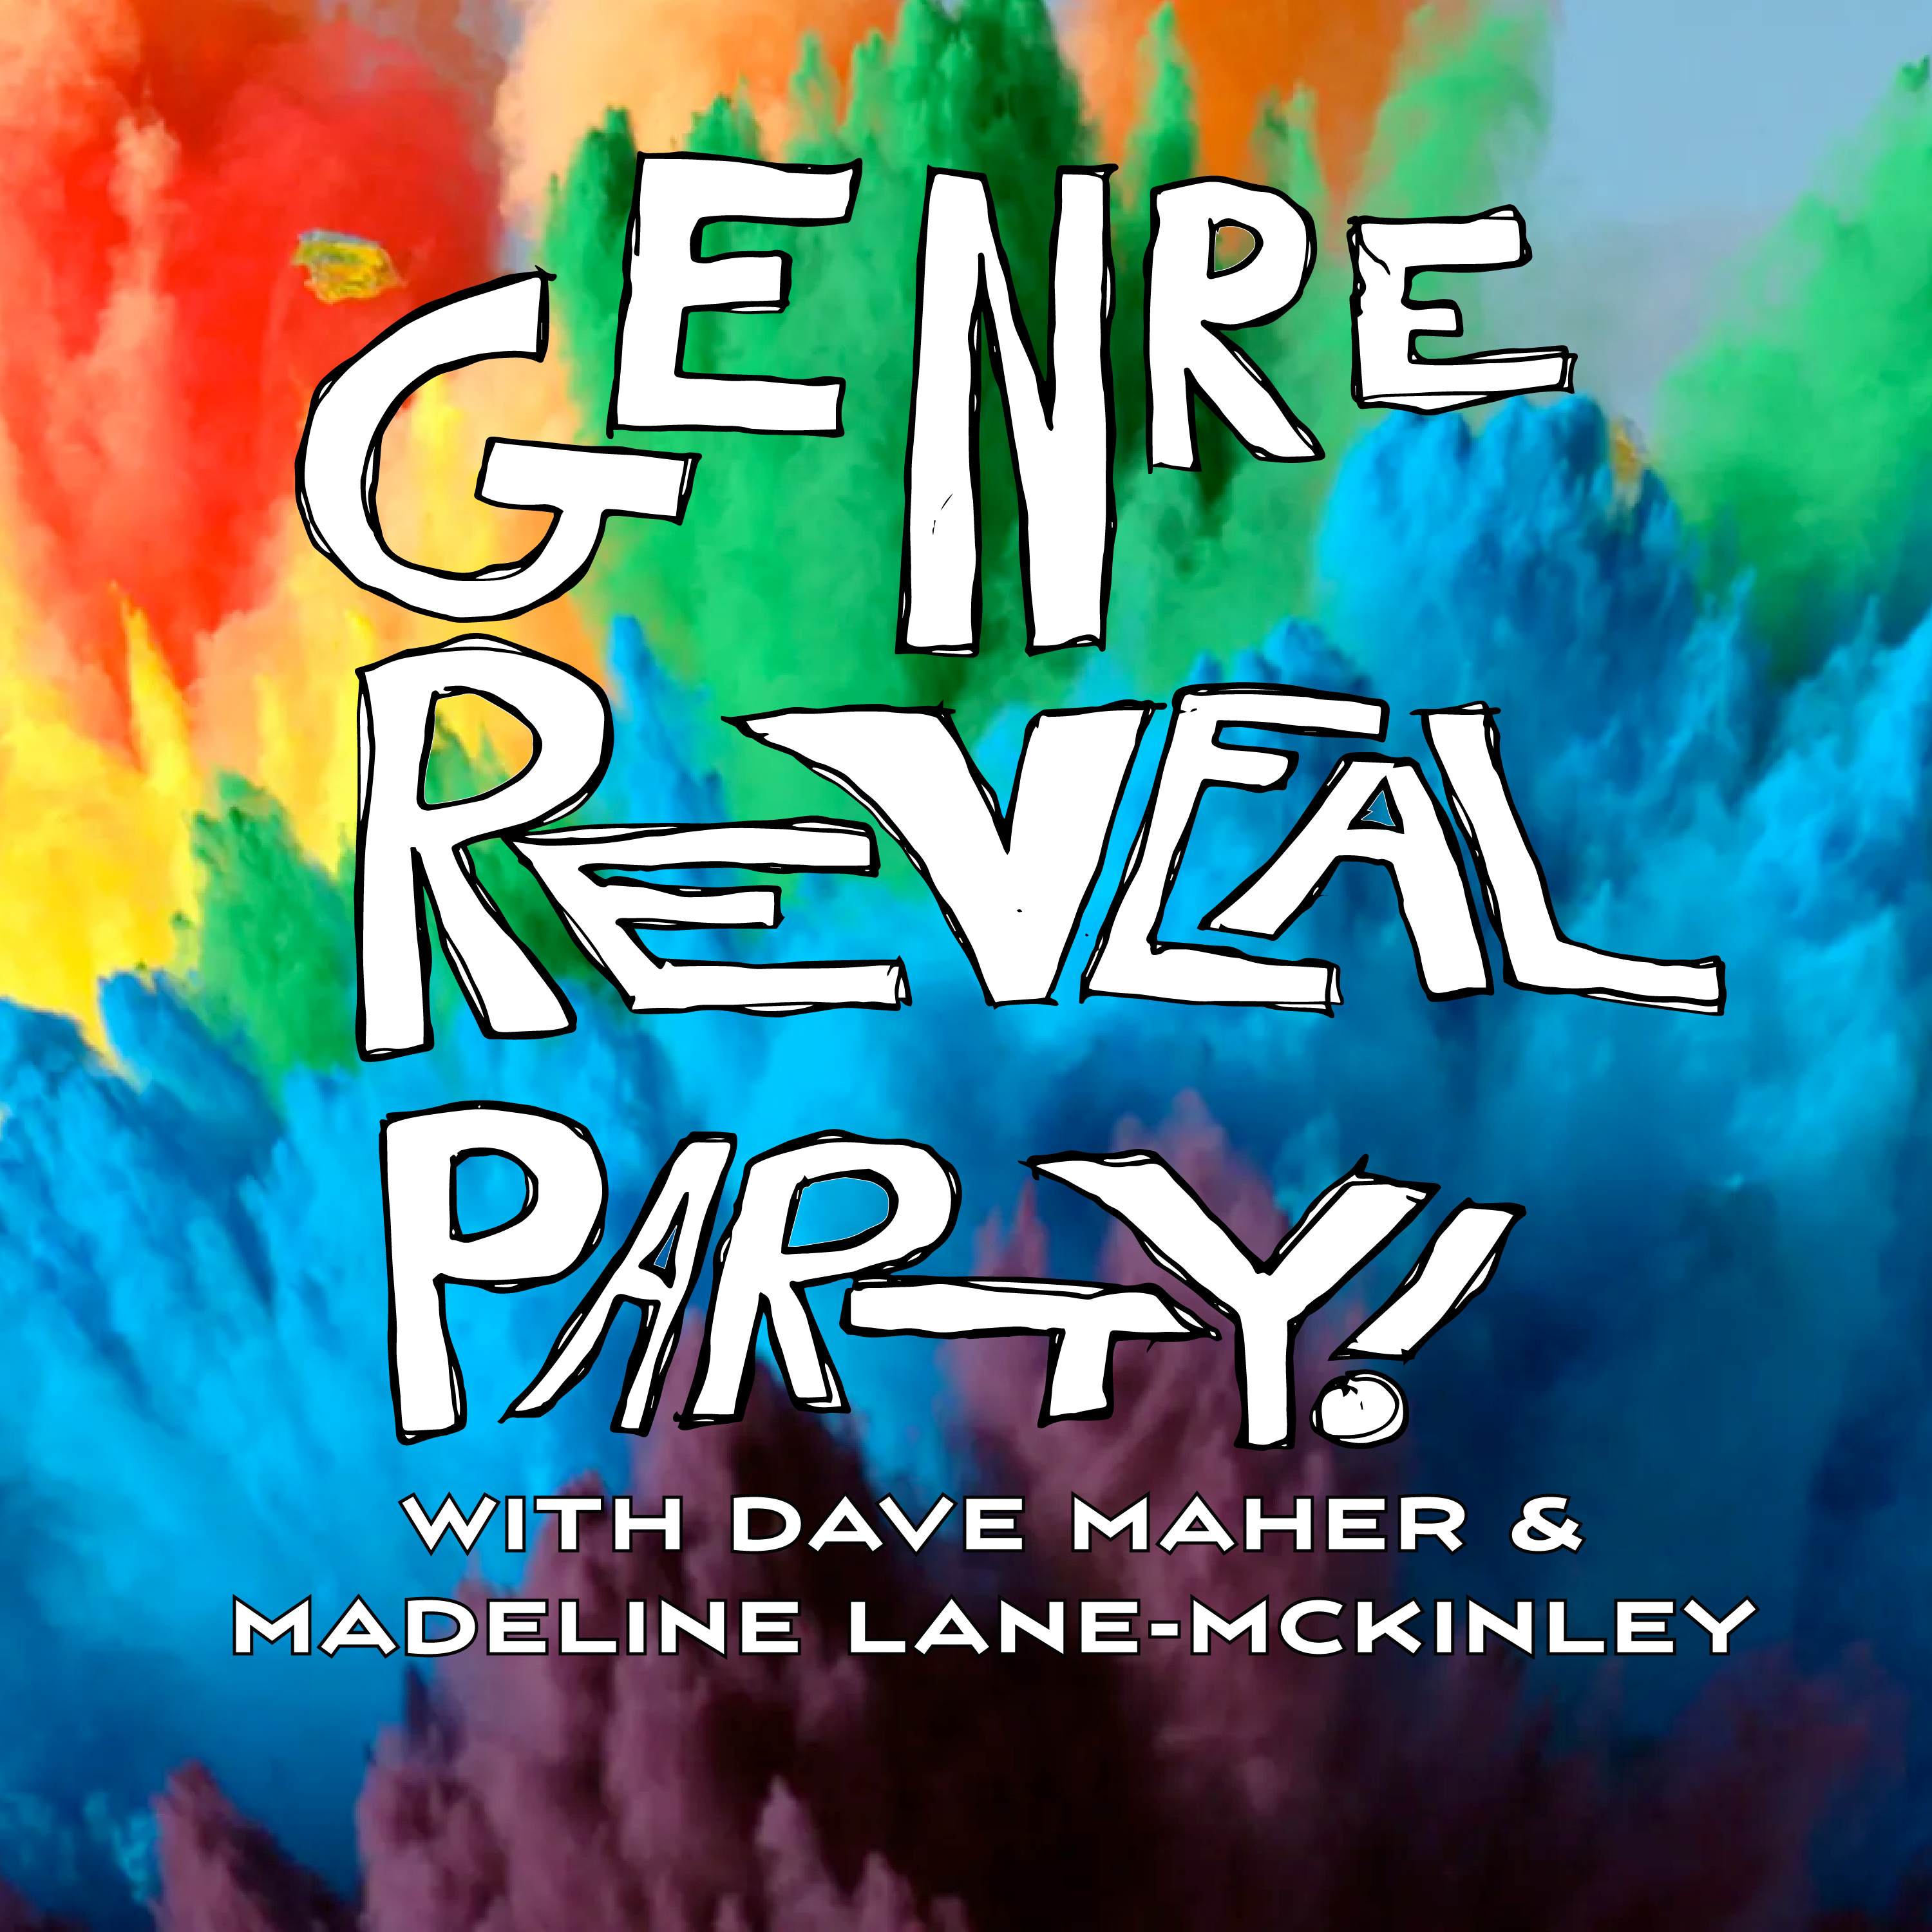 Artwork for Genre Reveal Party!